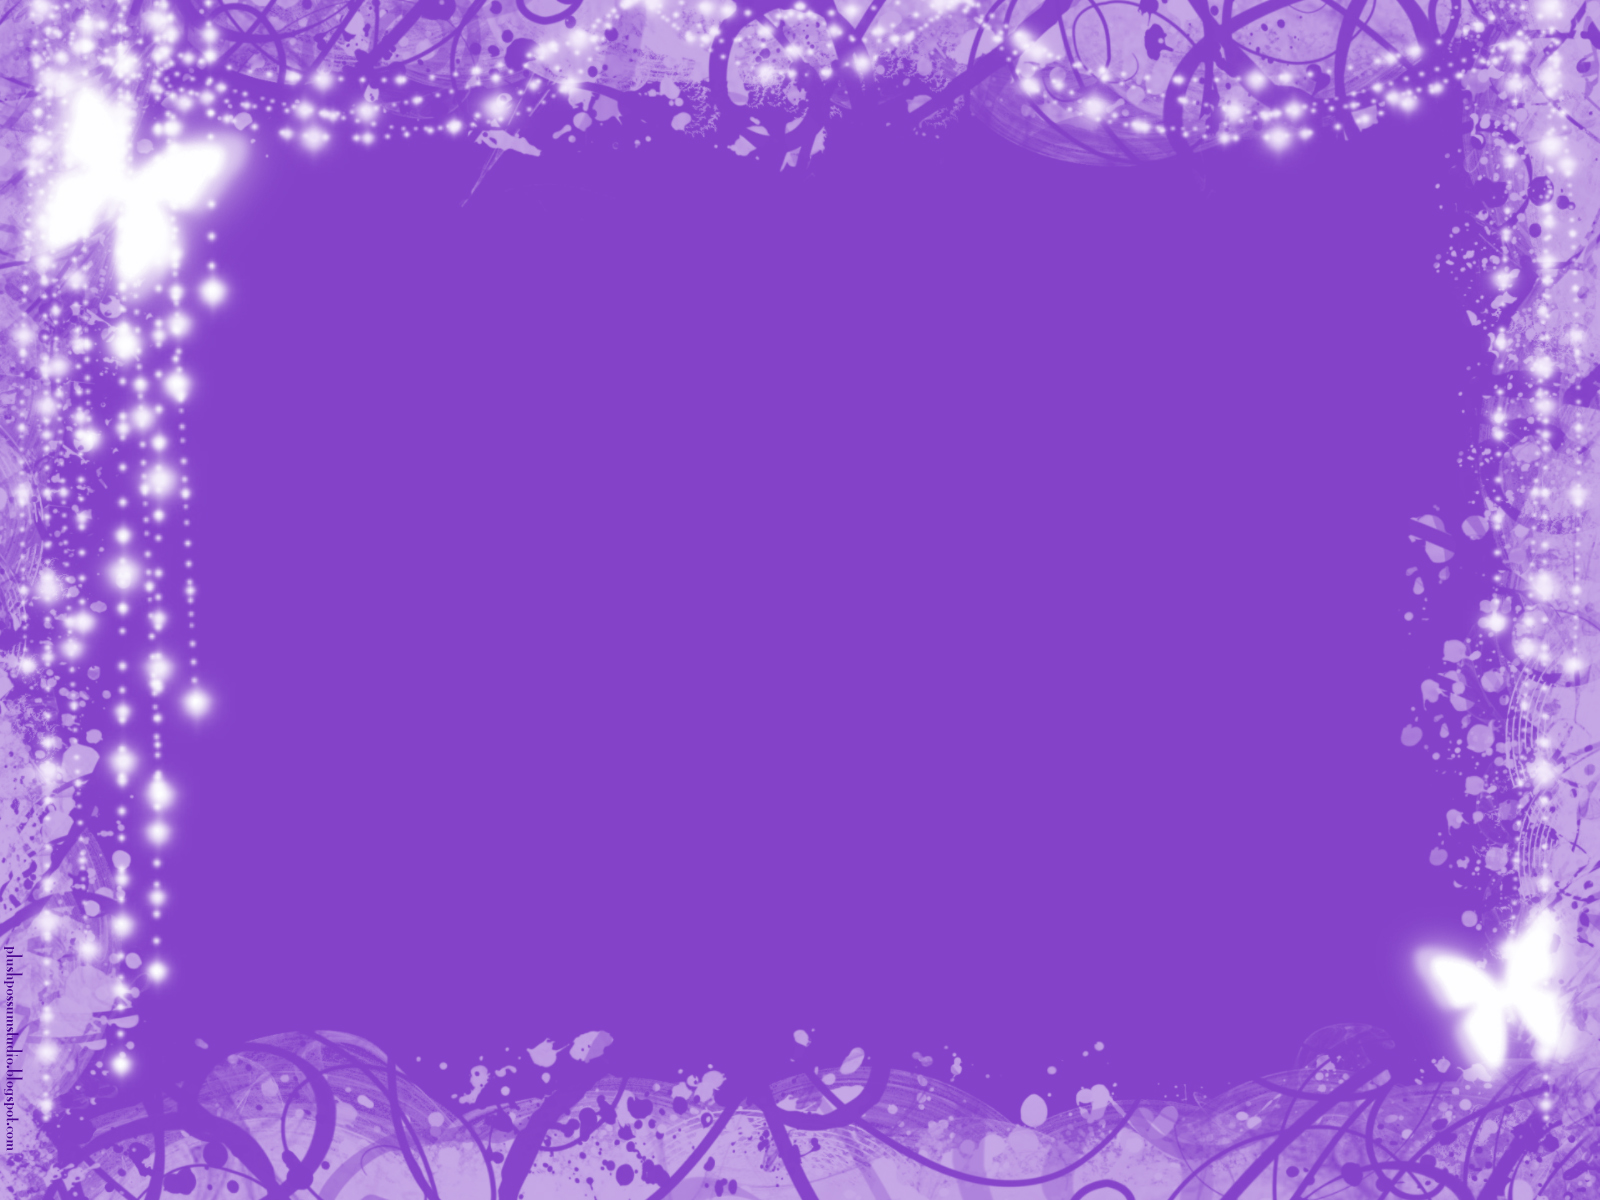 Gallery For Gt Purple Color Background Wallpaper